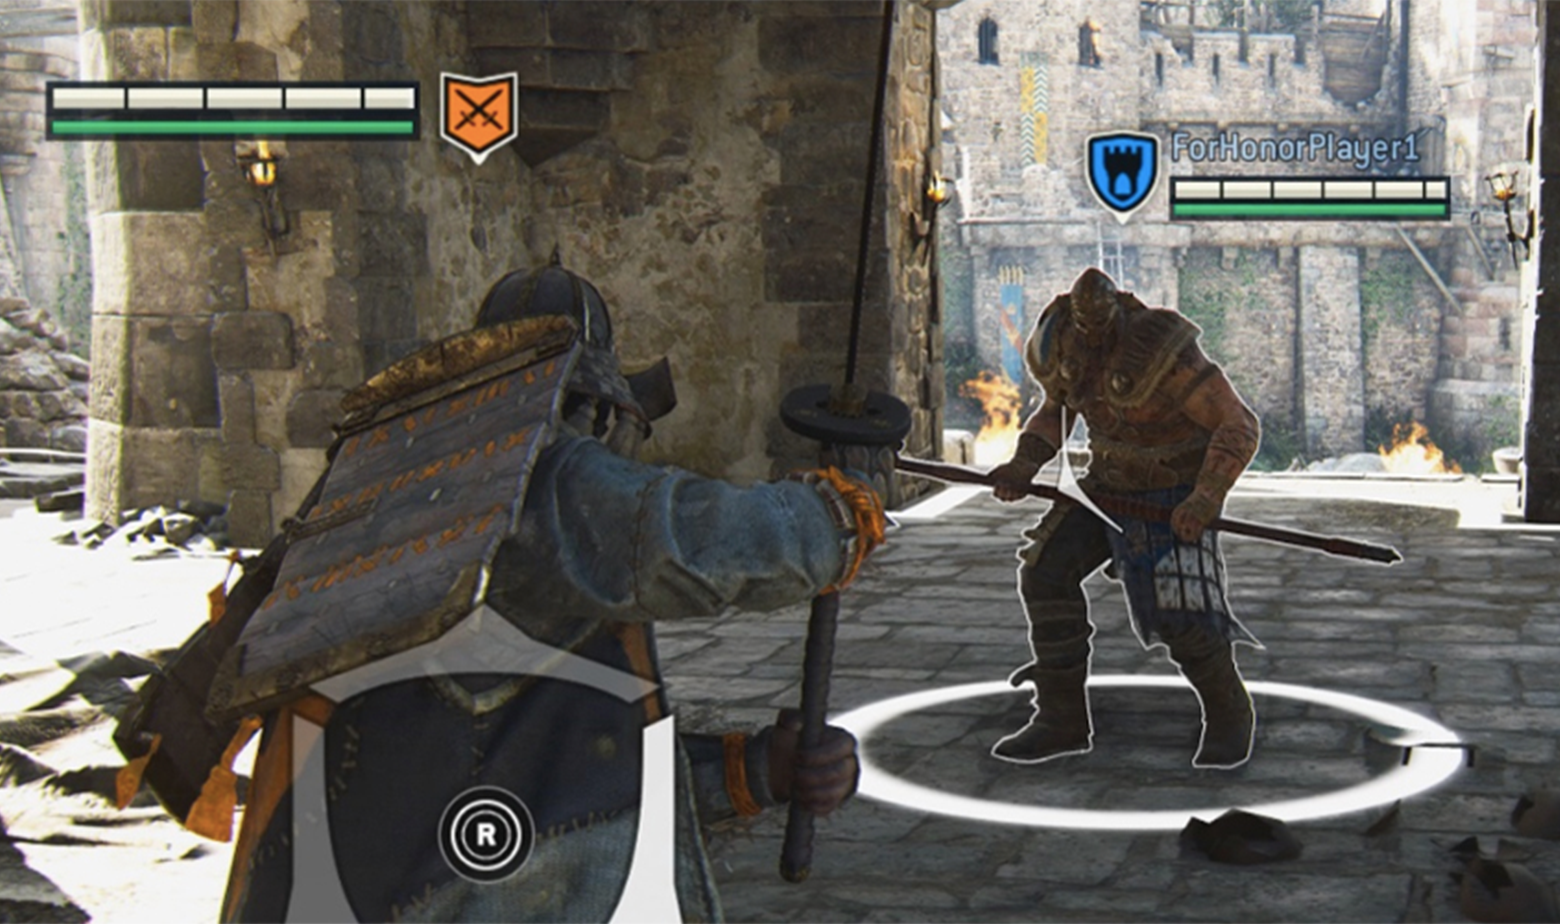 The For Honor heads-up display has progress bars that track the players’ health. The Two characters face off, prepared for battle, and a hit zone encircles Player 1.